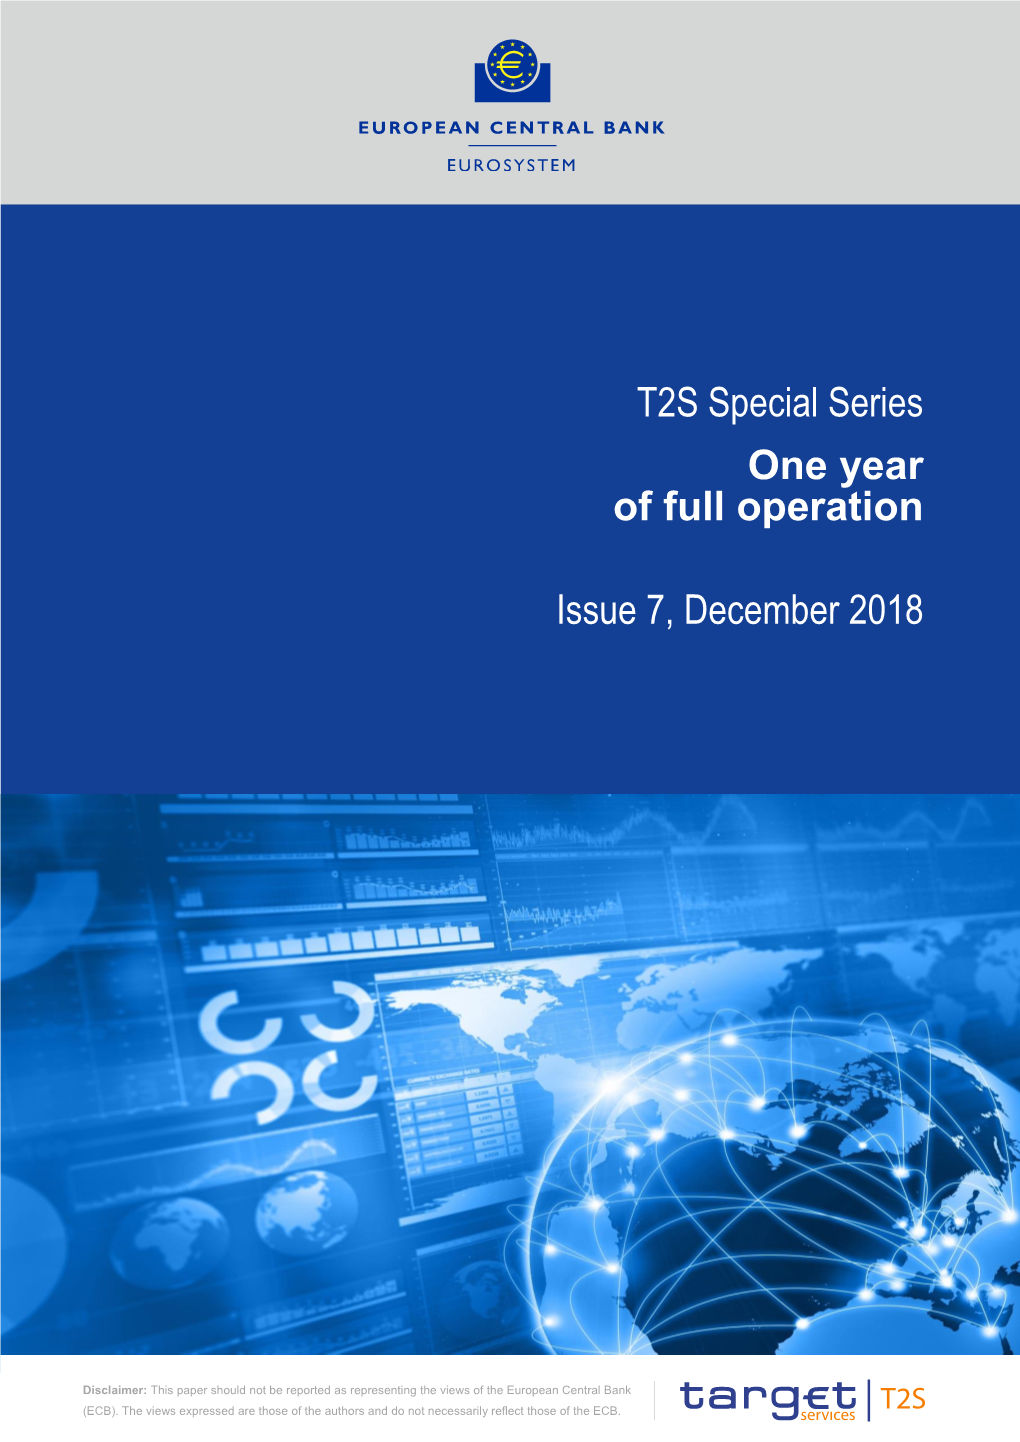 T2S Special Series One Year of Full Operation